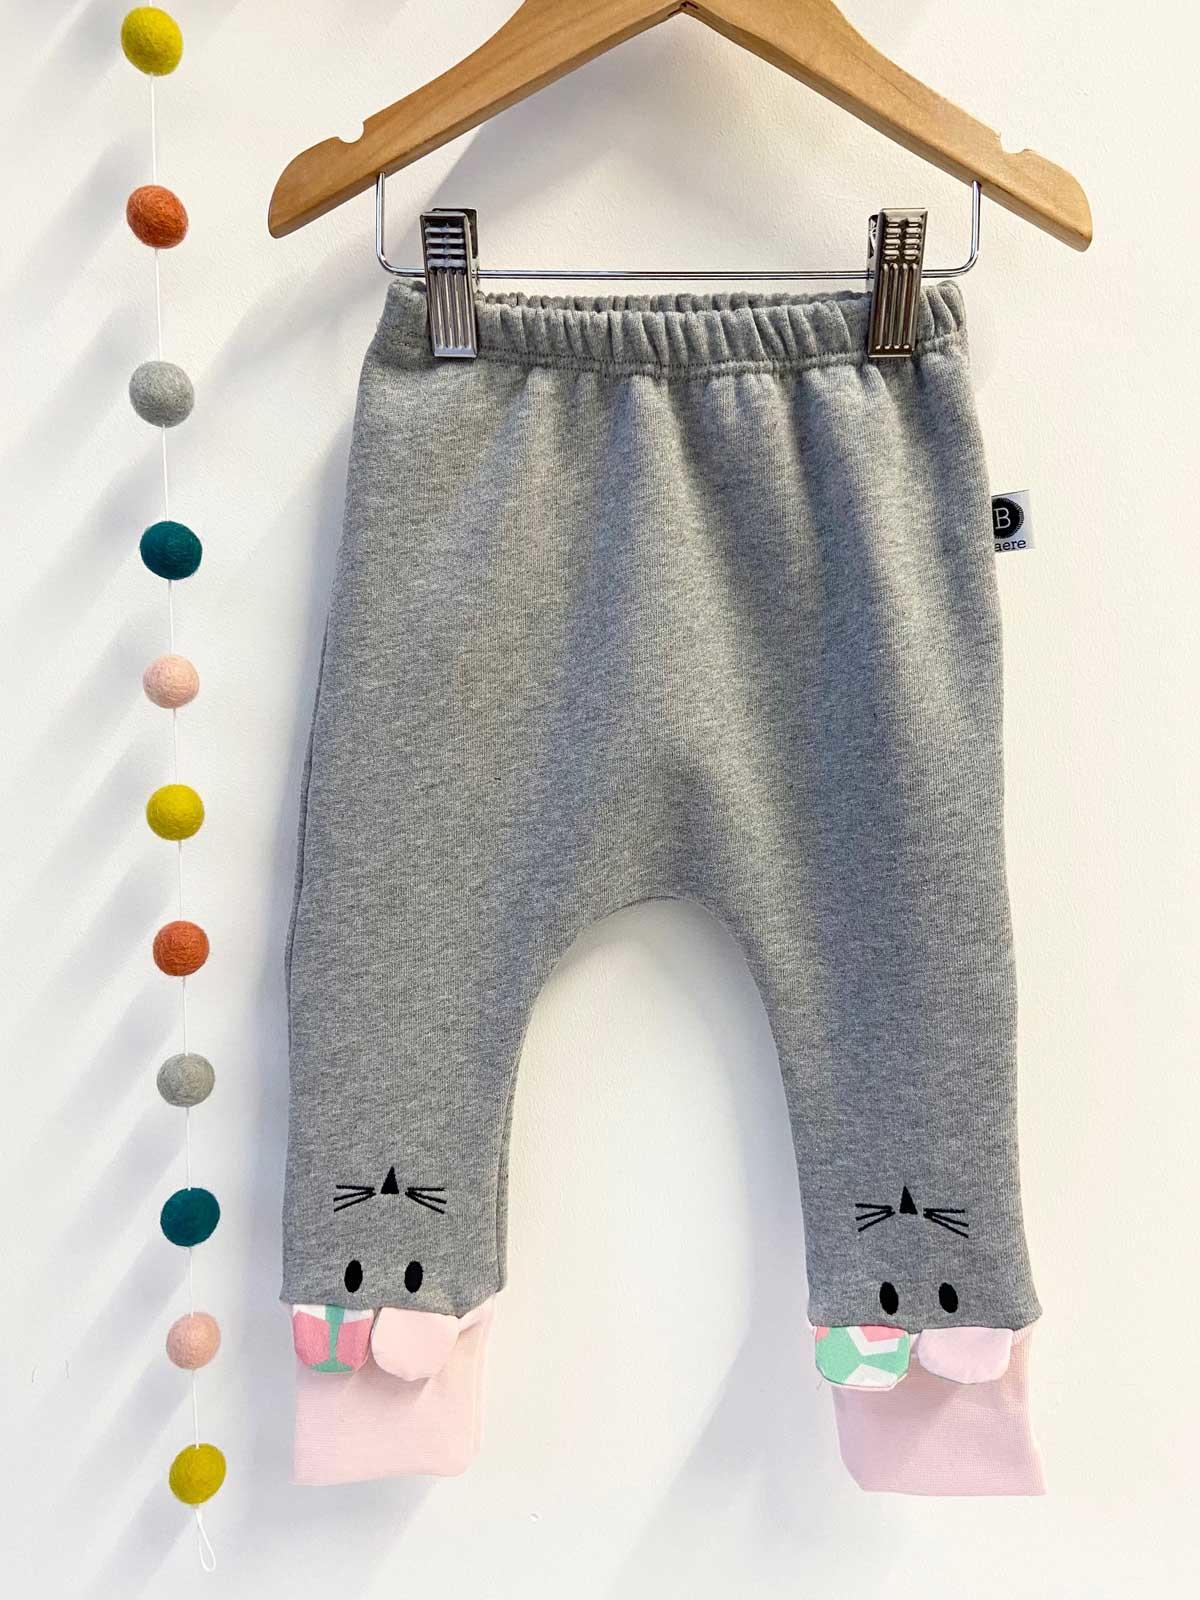  handmade baby clothes